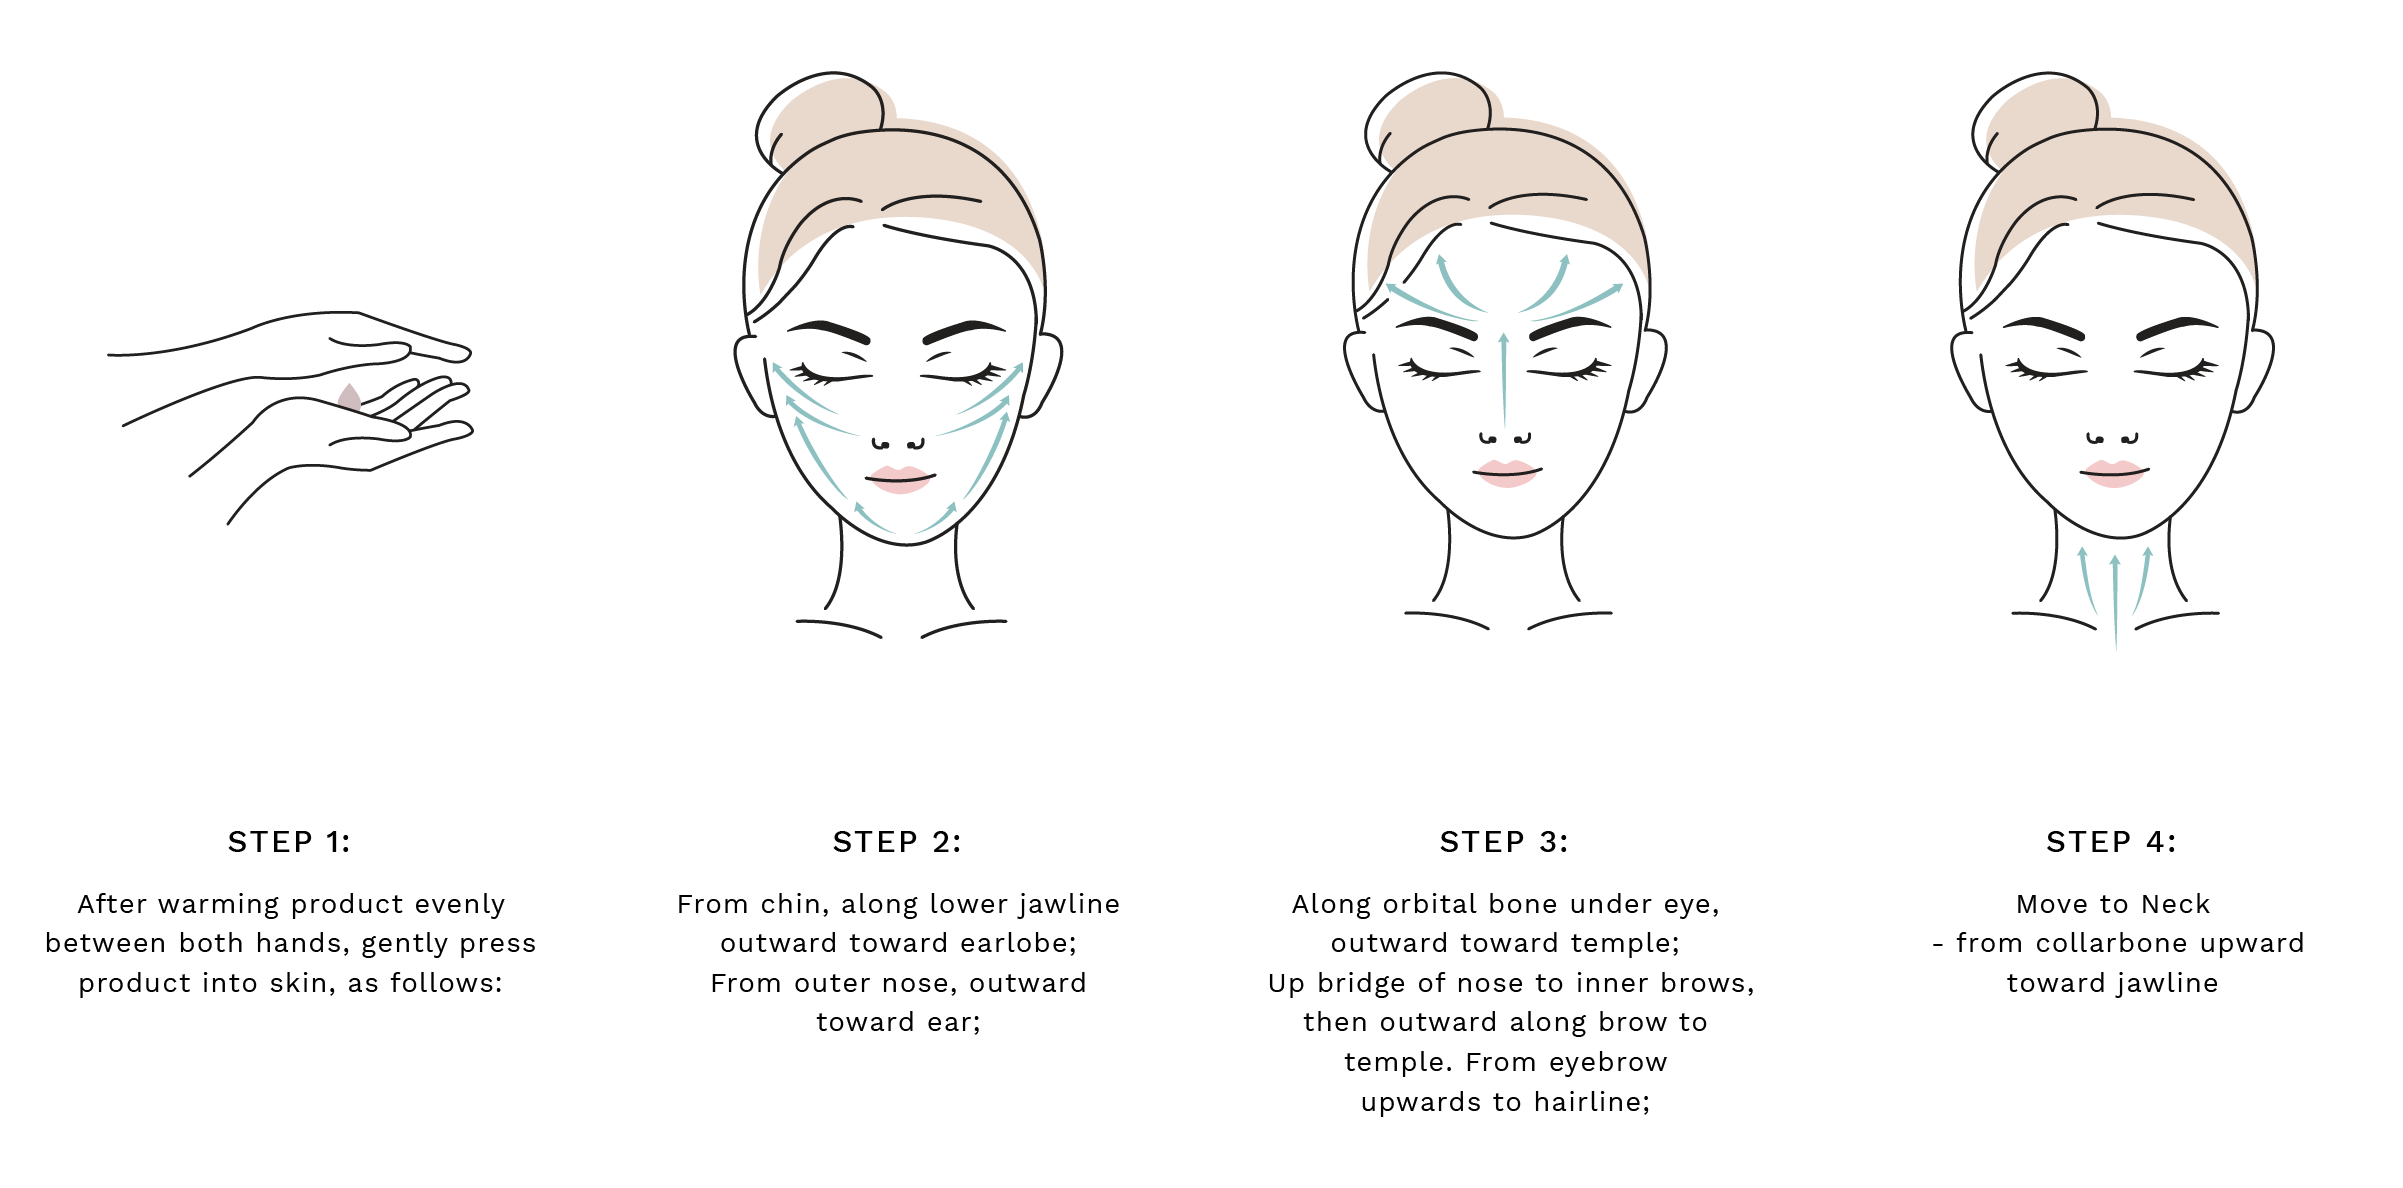 Step 1: After warming product evenly between both hands, gently press product into skin, as follows:  Step 2: From chin, along lower jawline outward toward earlobe; From outer nose, outward toward ear;Step 3: Along orbital bone under eye, outward toward temple;  Up bridge of nose to inner brows, then outward along brow to temple. From eyebrow upwards to hairline; Step 4: Move to Neck - from collarbone upward toward jawline